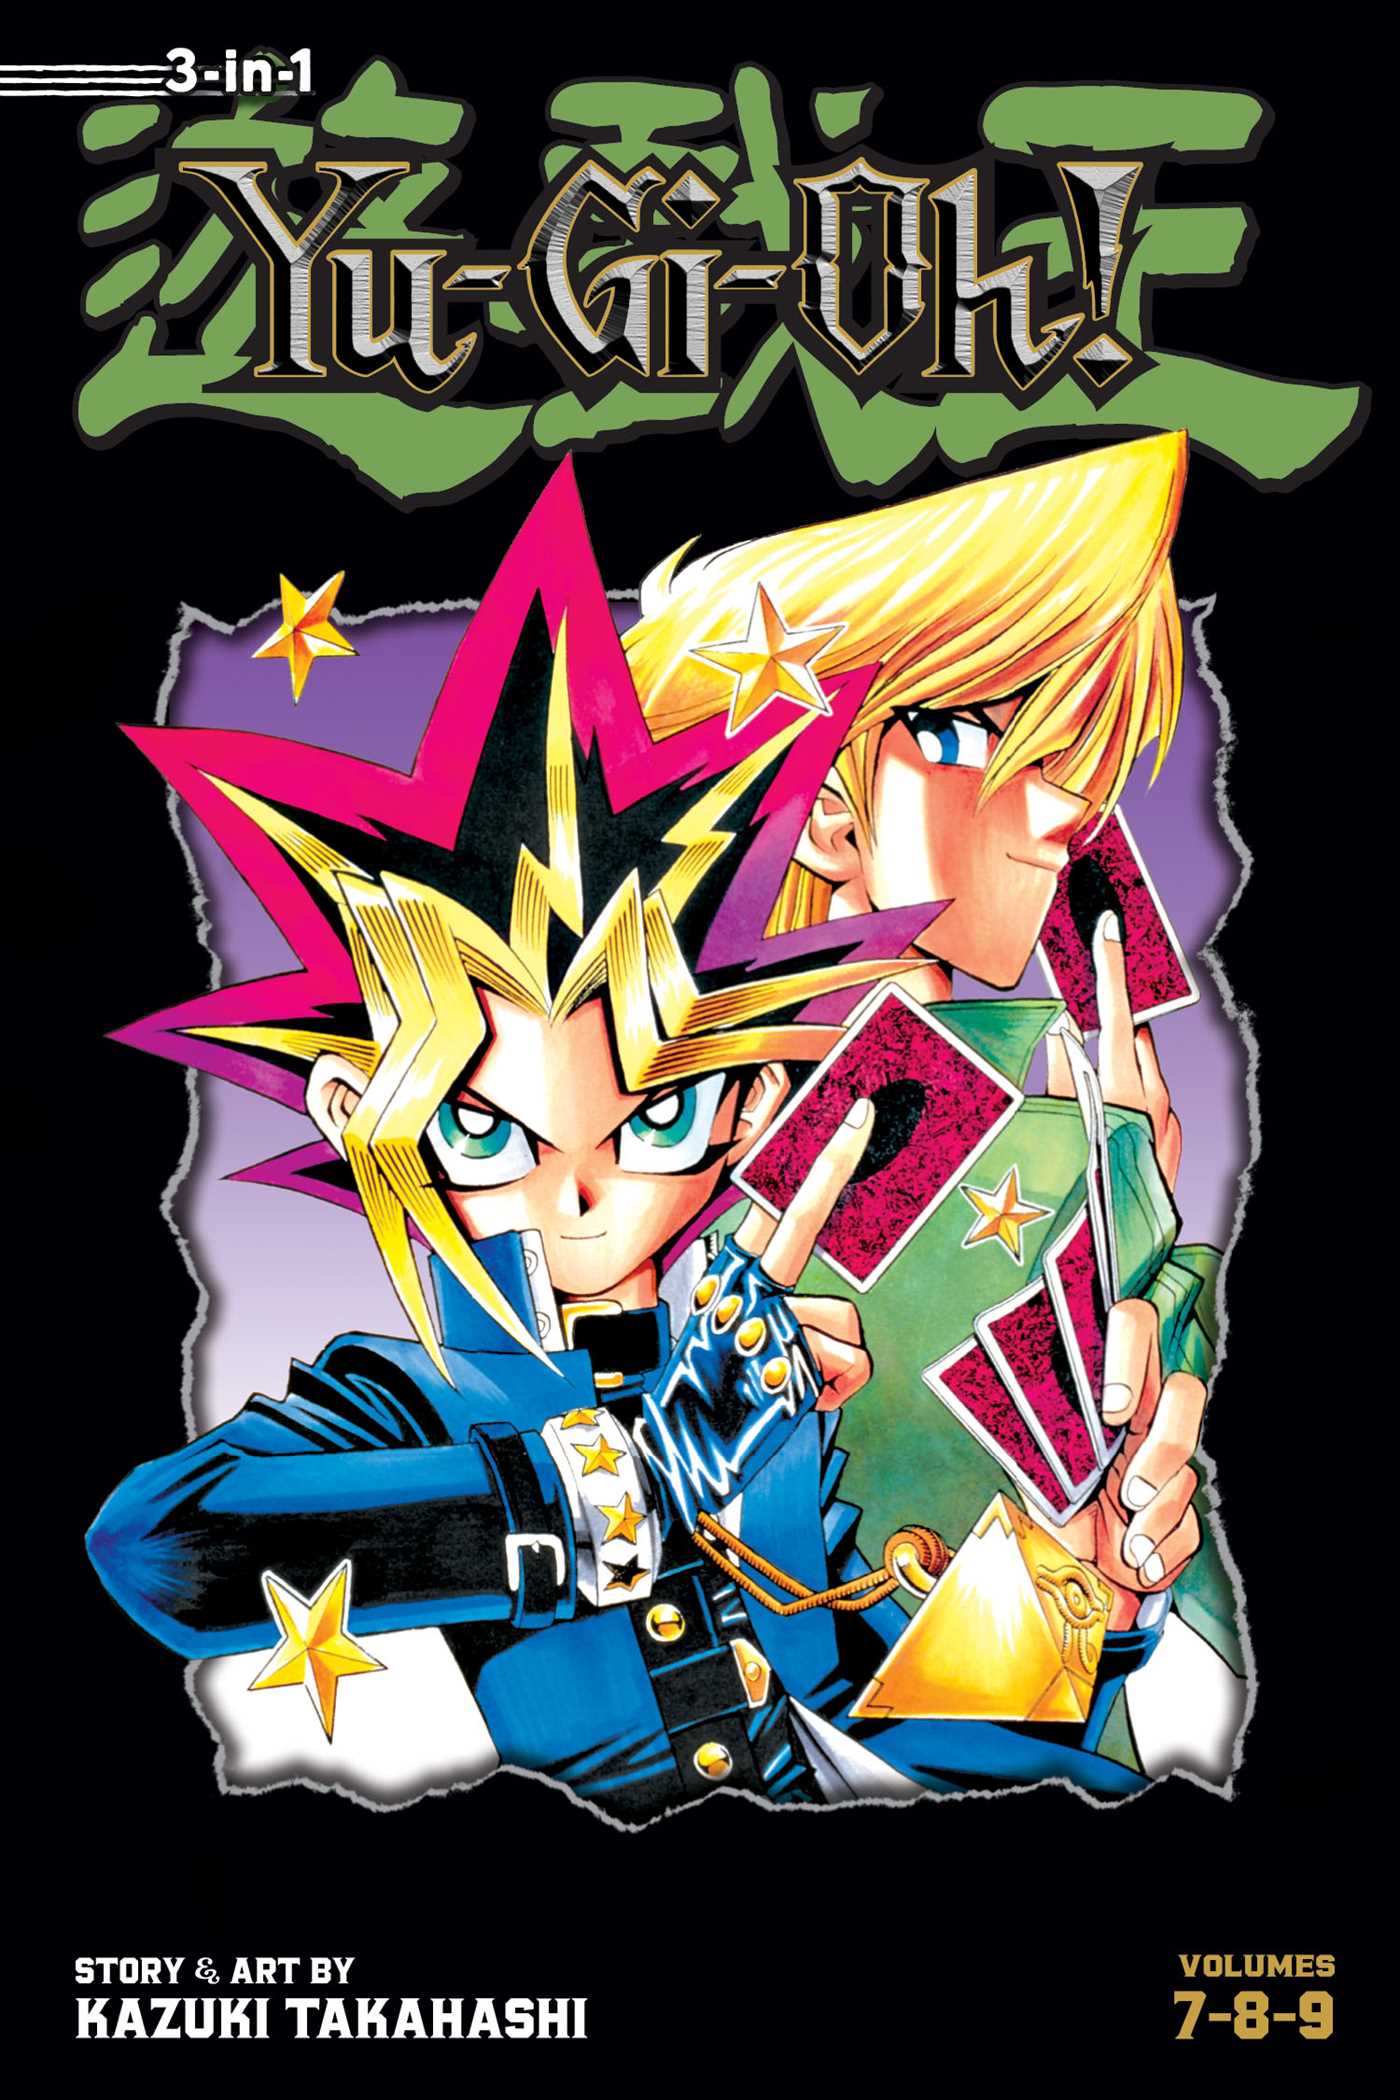 Yu Gi Oh! (3 In 1 Edition), Vol. 3. Book By Kazuki Takahashi. Official Publisher Page. Simon & Schuster